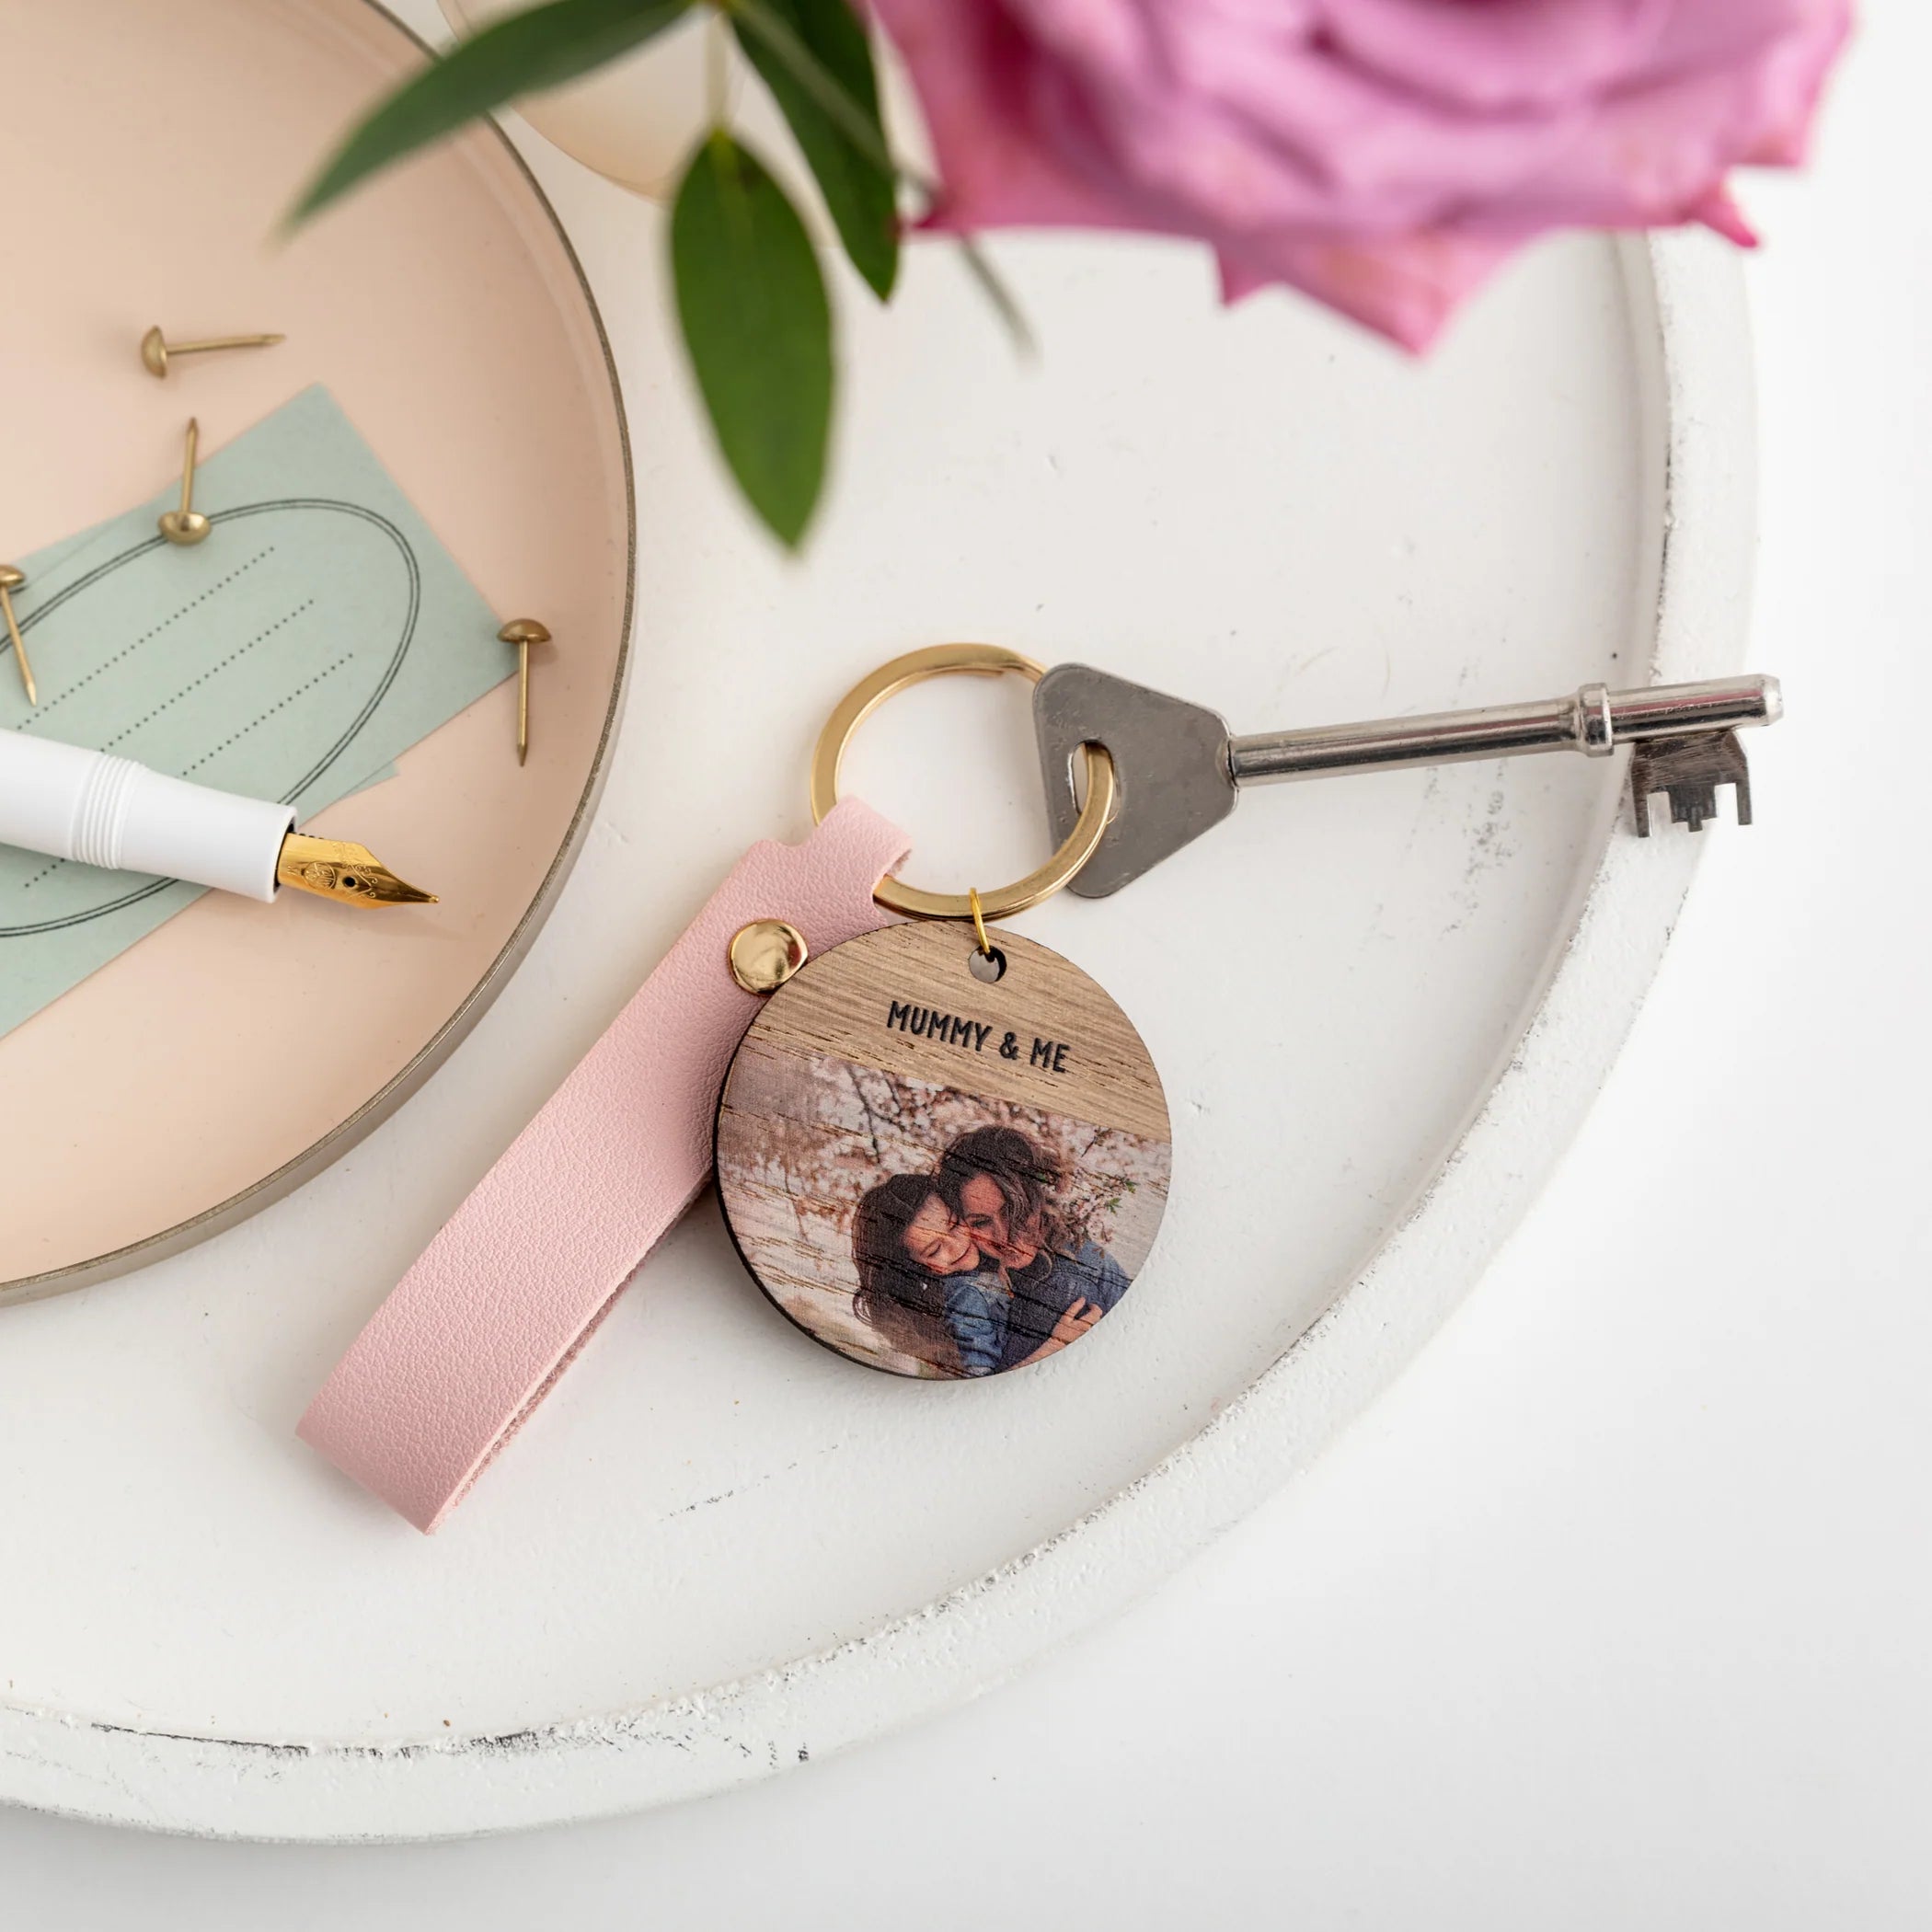 Capture Memories Forever with Mini Photo Gifts!